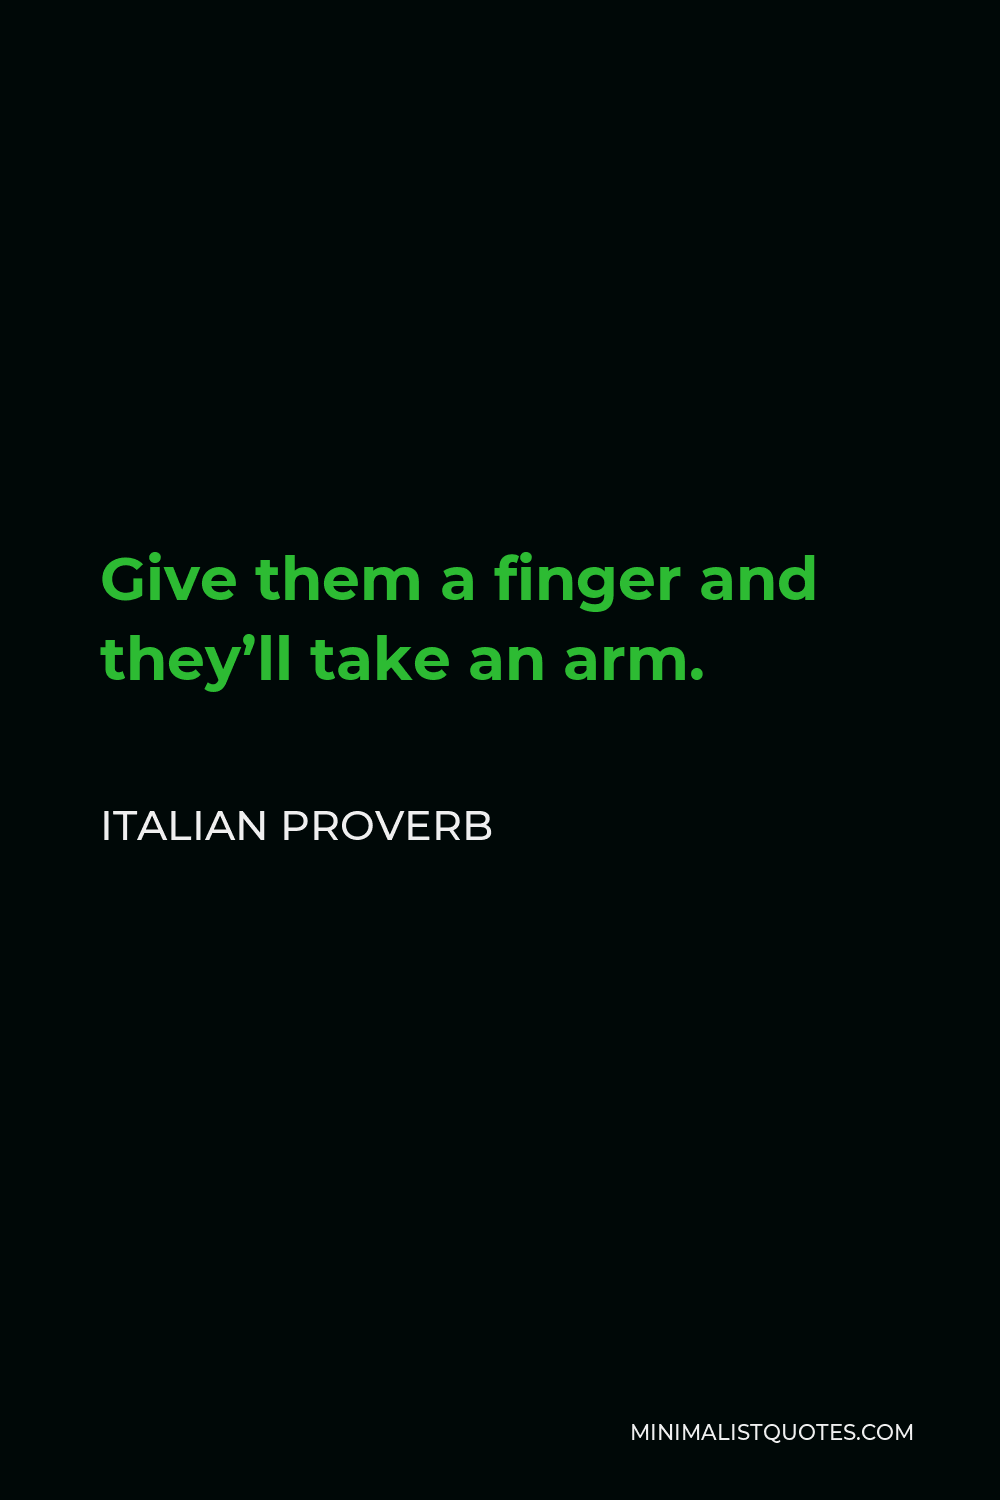 Italian Proverb Quote - Give them a finger and they’ll take an arm.